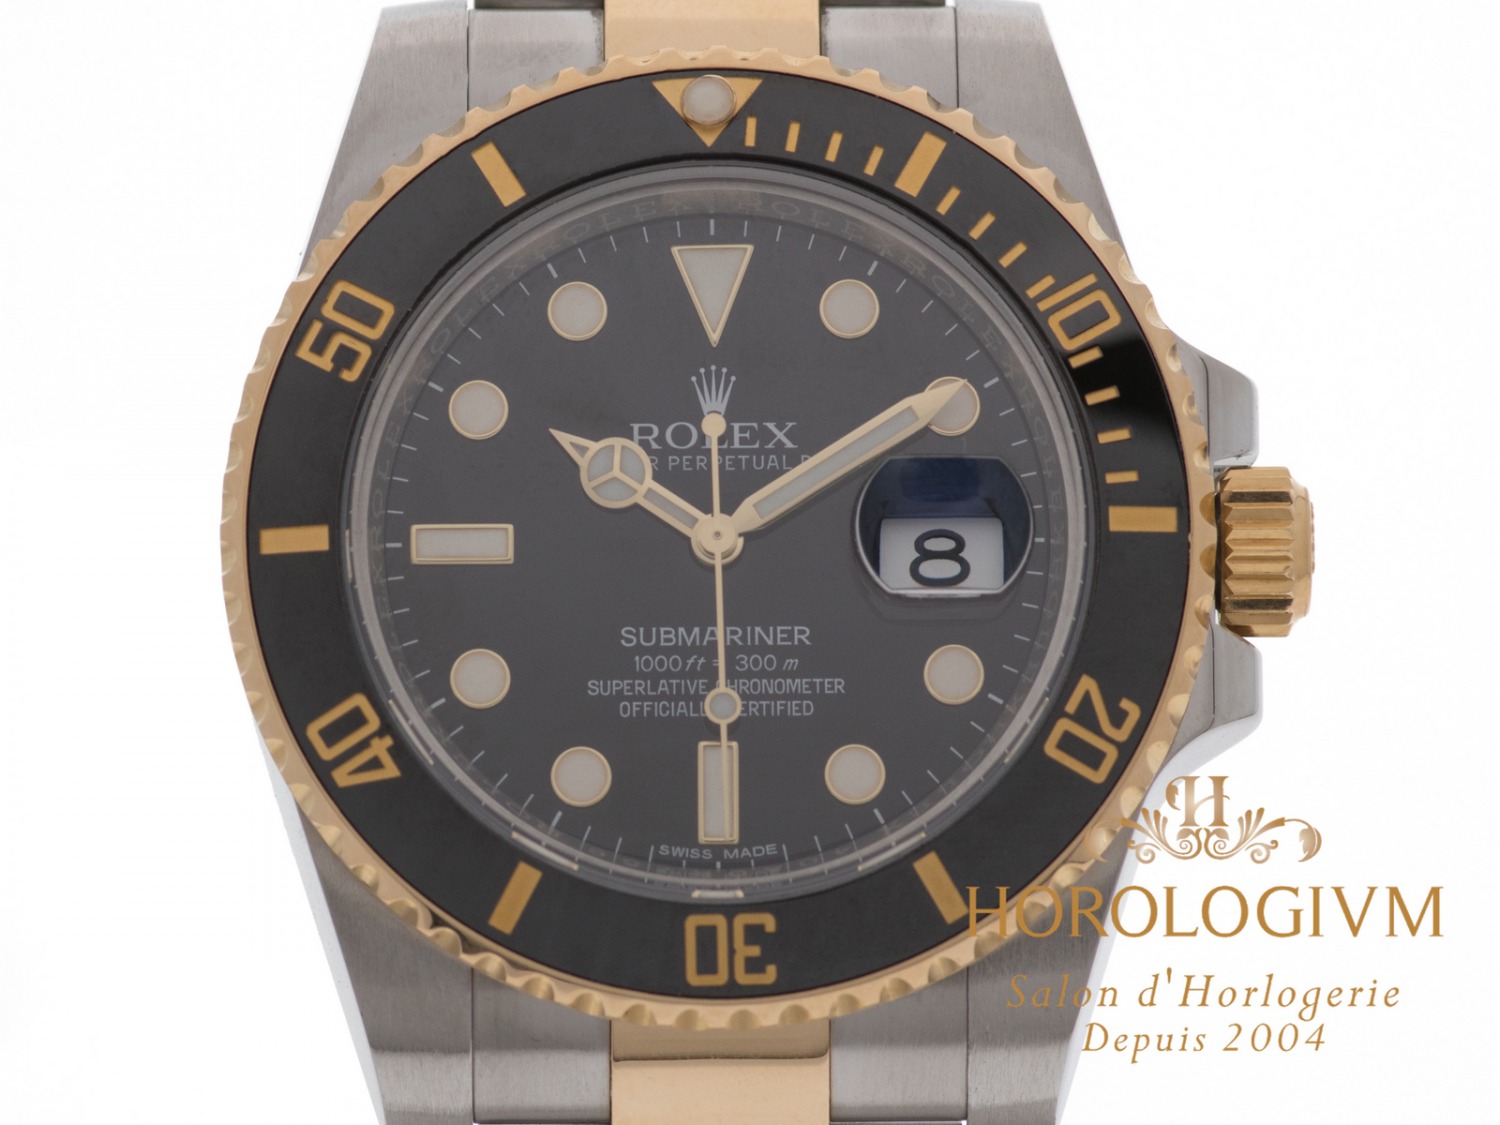 Rolex Submariner Date Two-Tone 40MM Ref. 116613LN watch, two - tone (bi - colored) silver (case) and yellow gold & black ceramic (bezel)